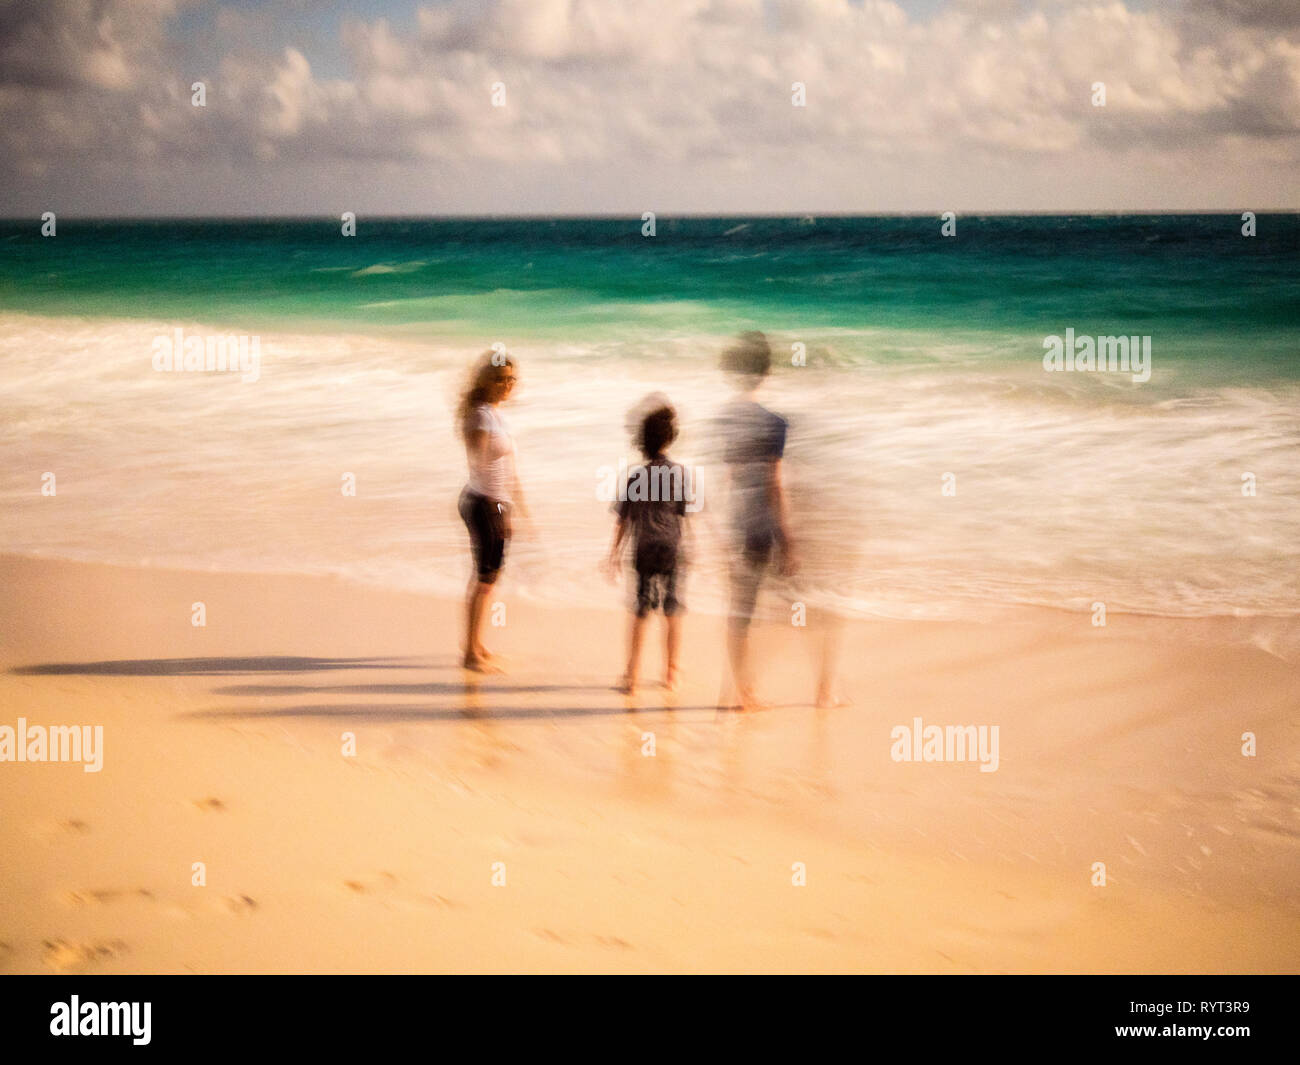 Three Young people on beach, Tropical Beach Nigh time, Moonlight, Governors Harbour, Eleuthera, The Bahamas, The Caribbean. Stock Photo